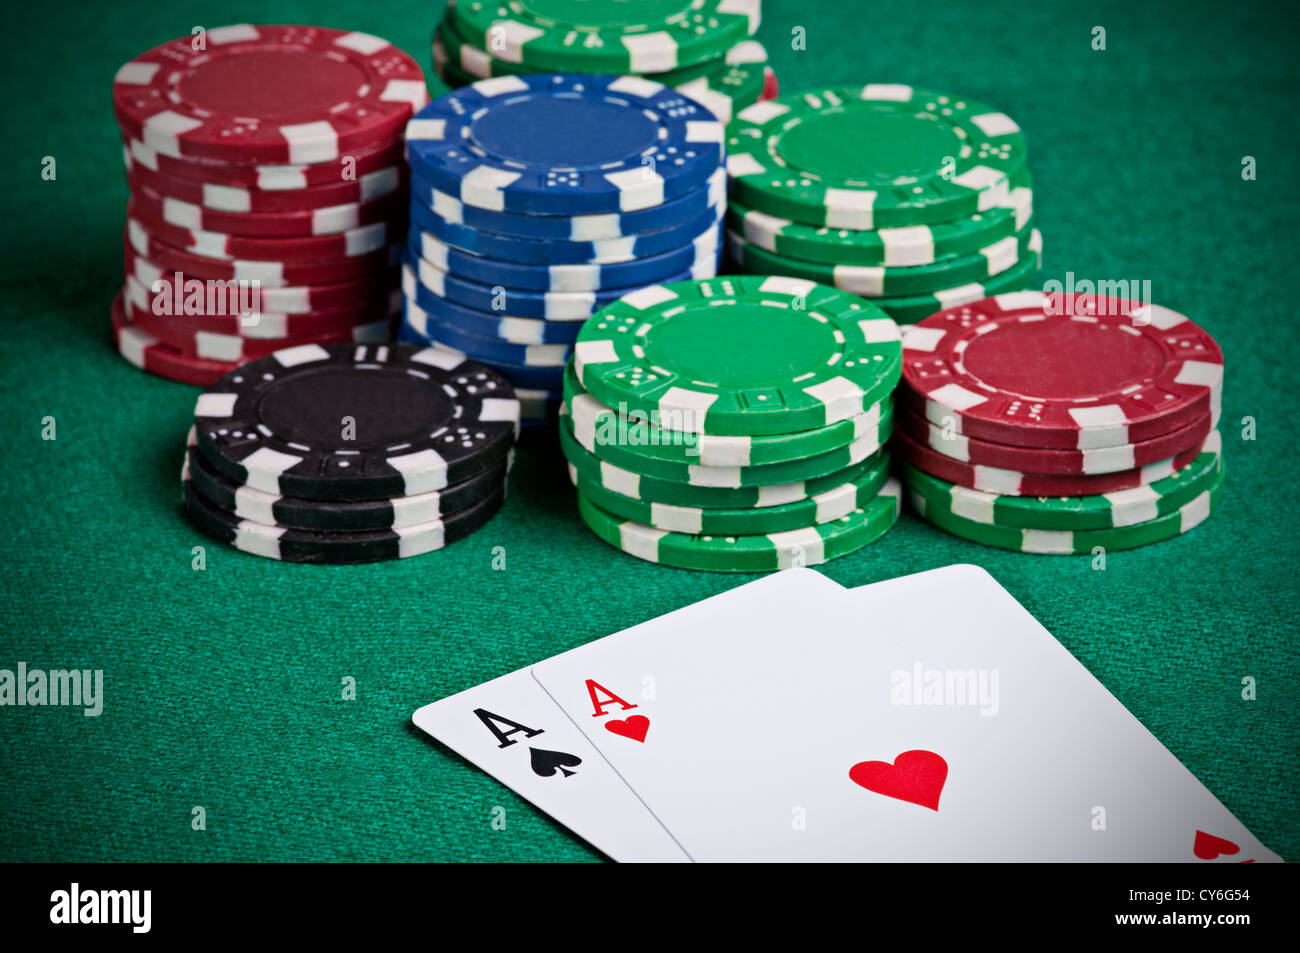 Pair of aces on a poker table with poker chips next to them Stock Photo